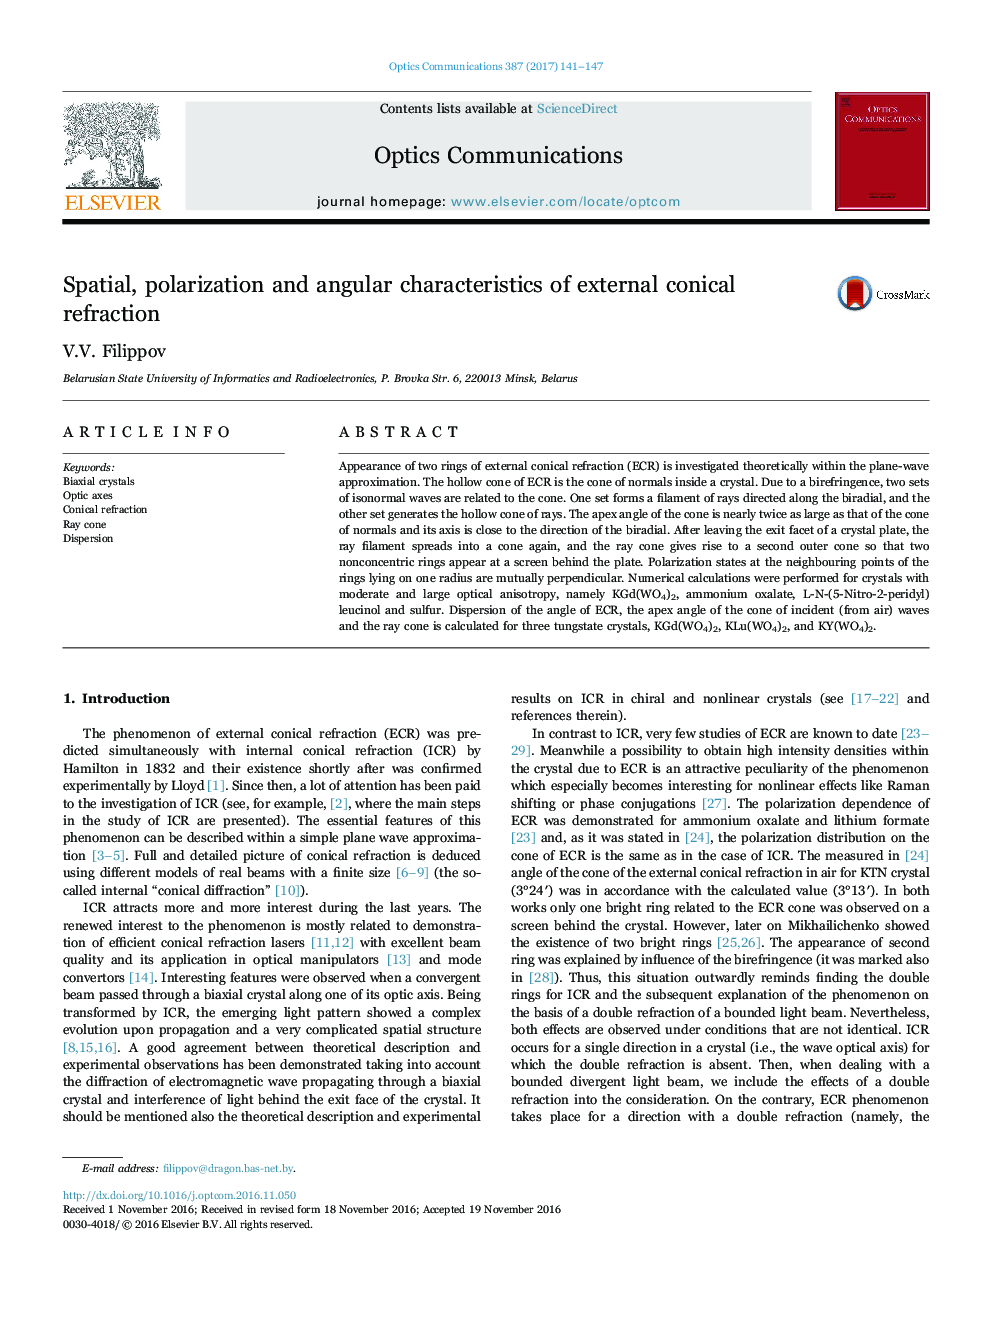 Spatial, polarization and angular characteristics of external conical refraction